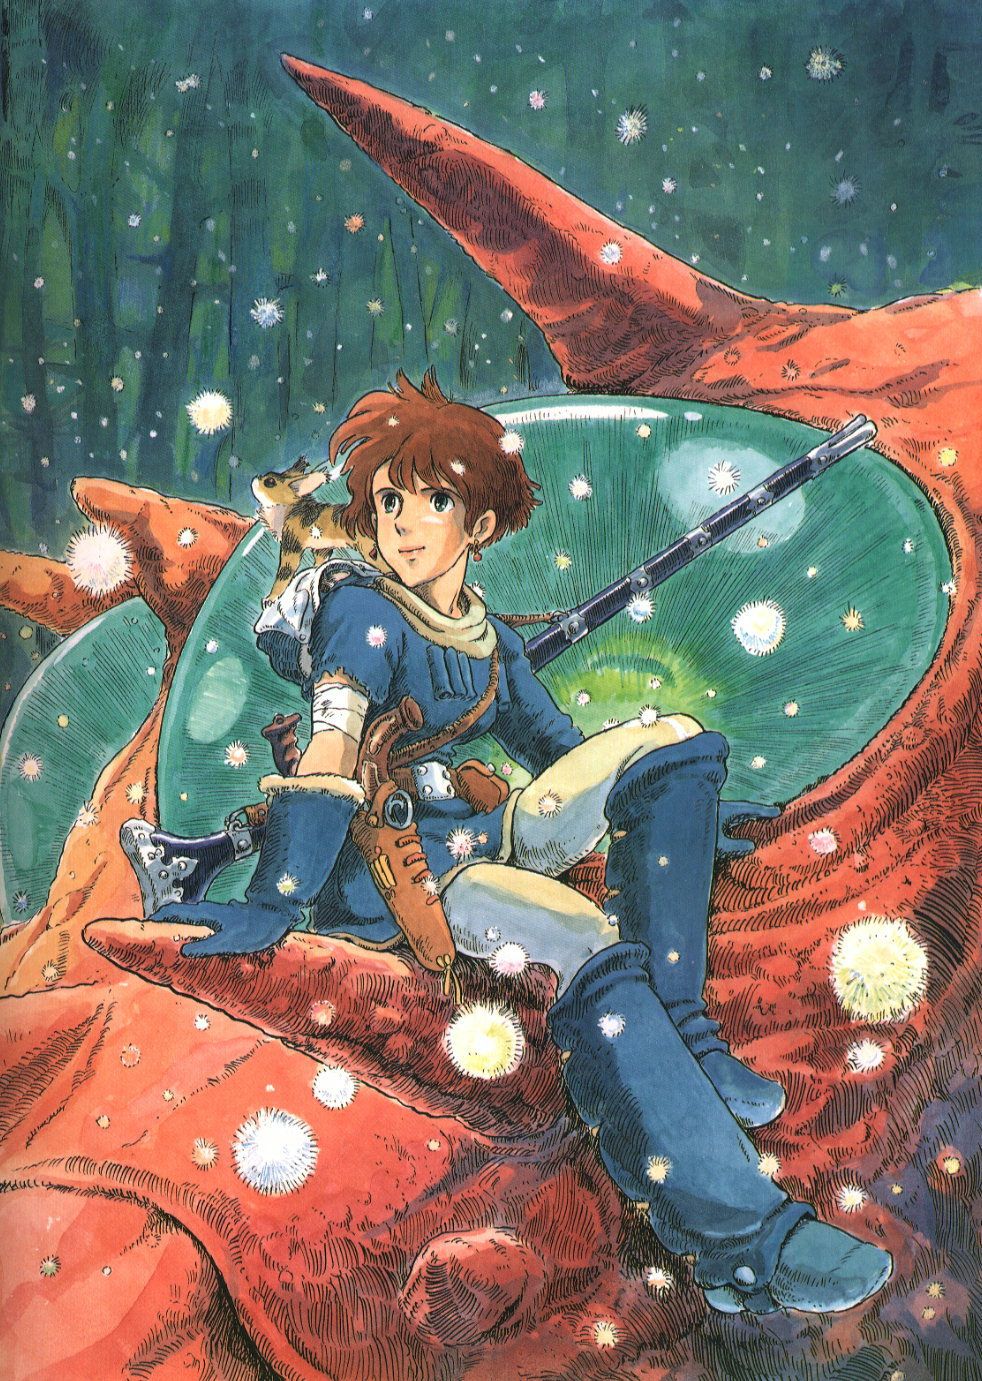 Amazing Nausicaä Of The Valley Of The Wind Pictures & Backgrounds